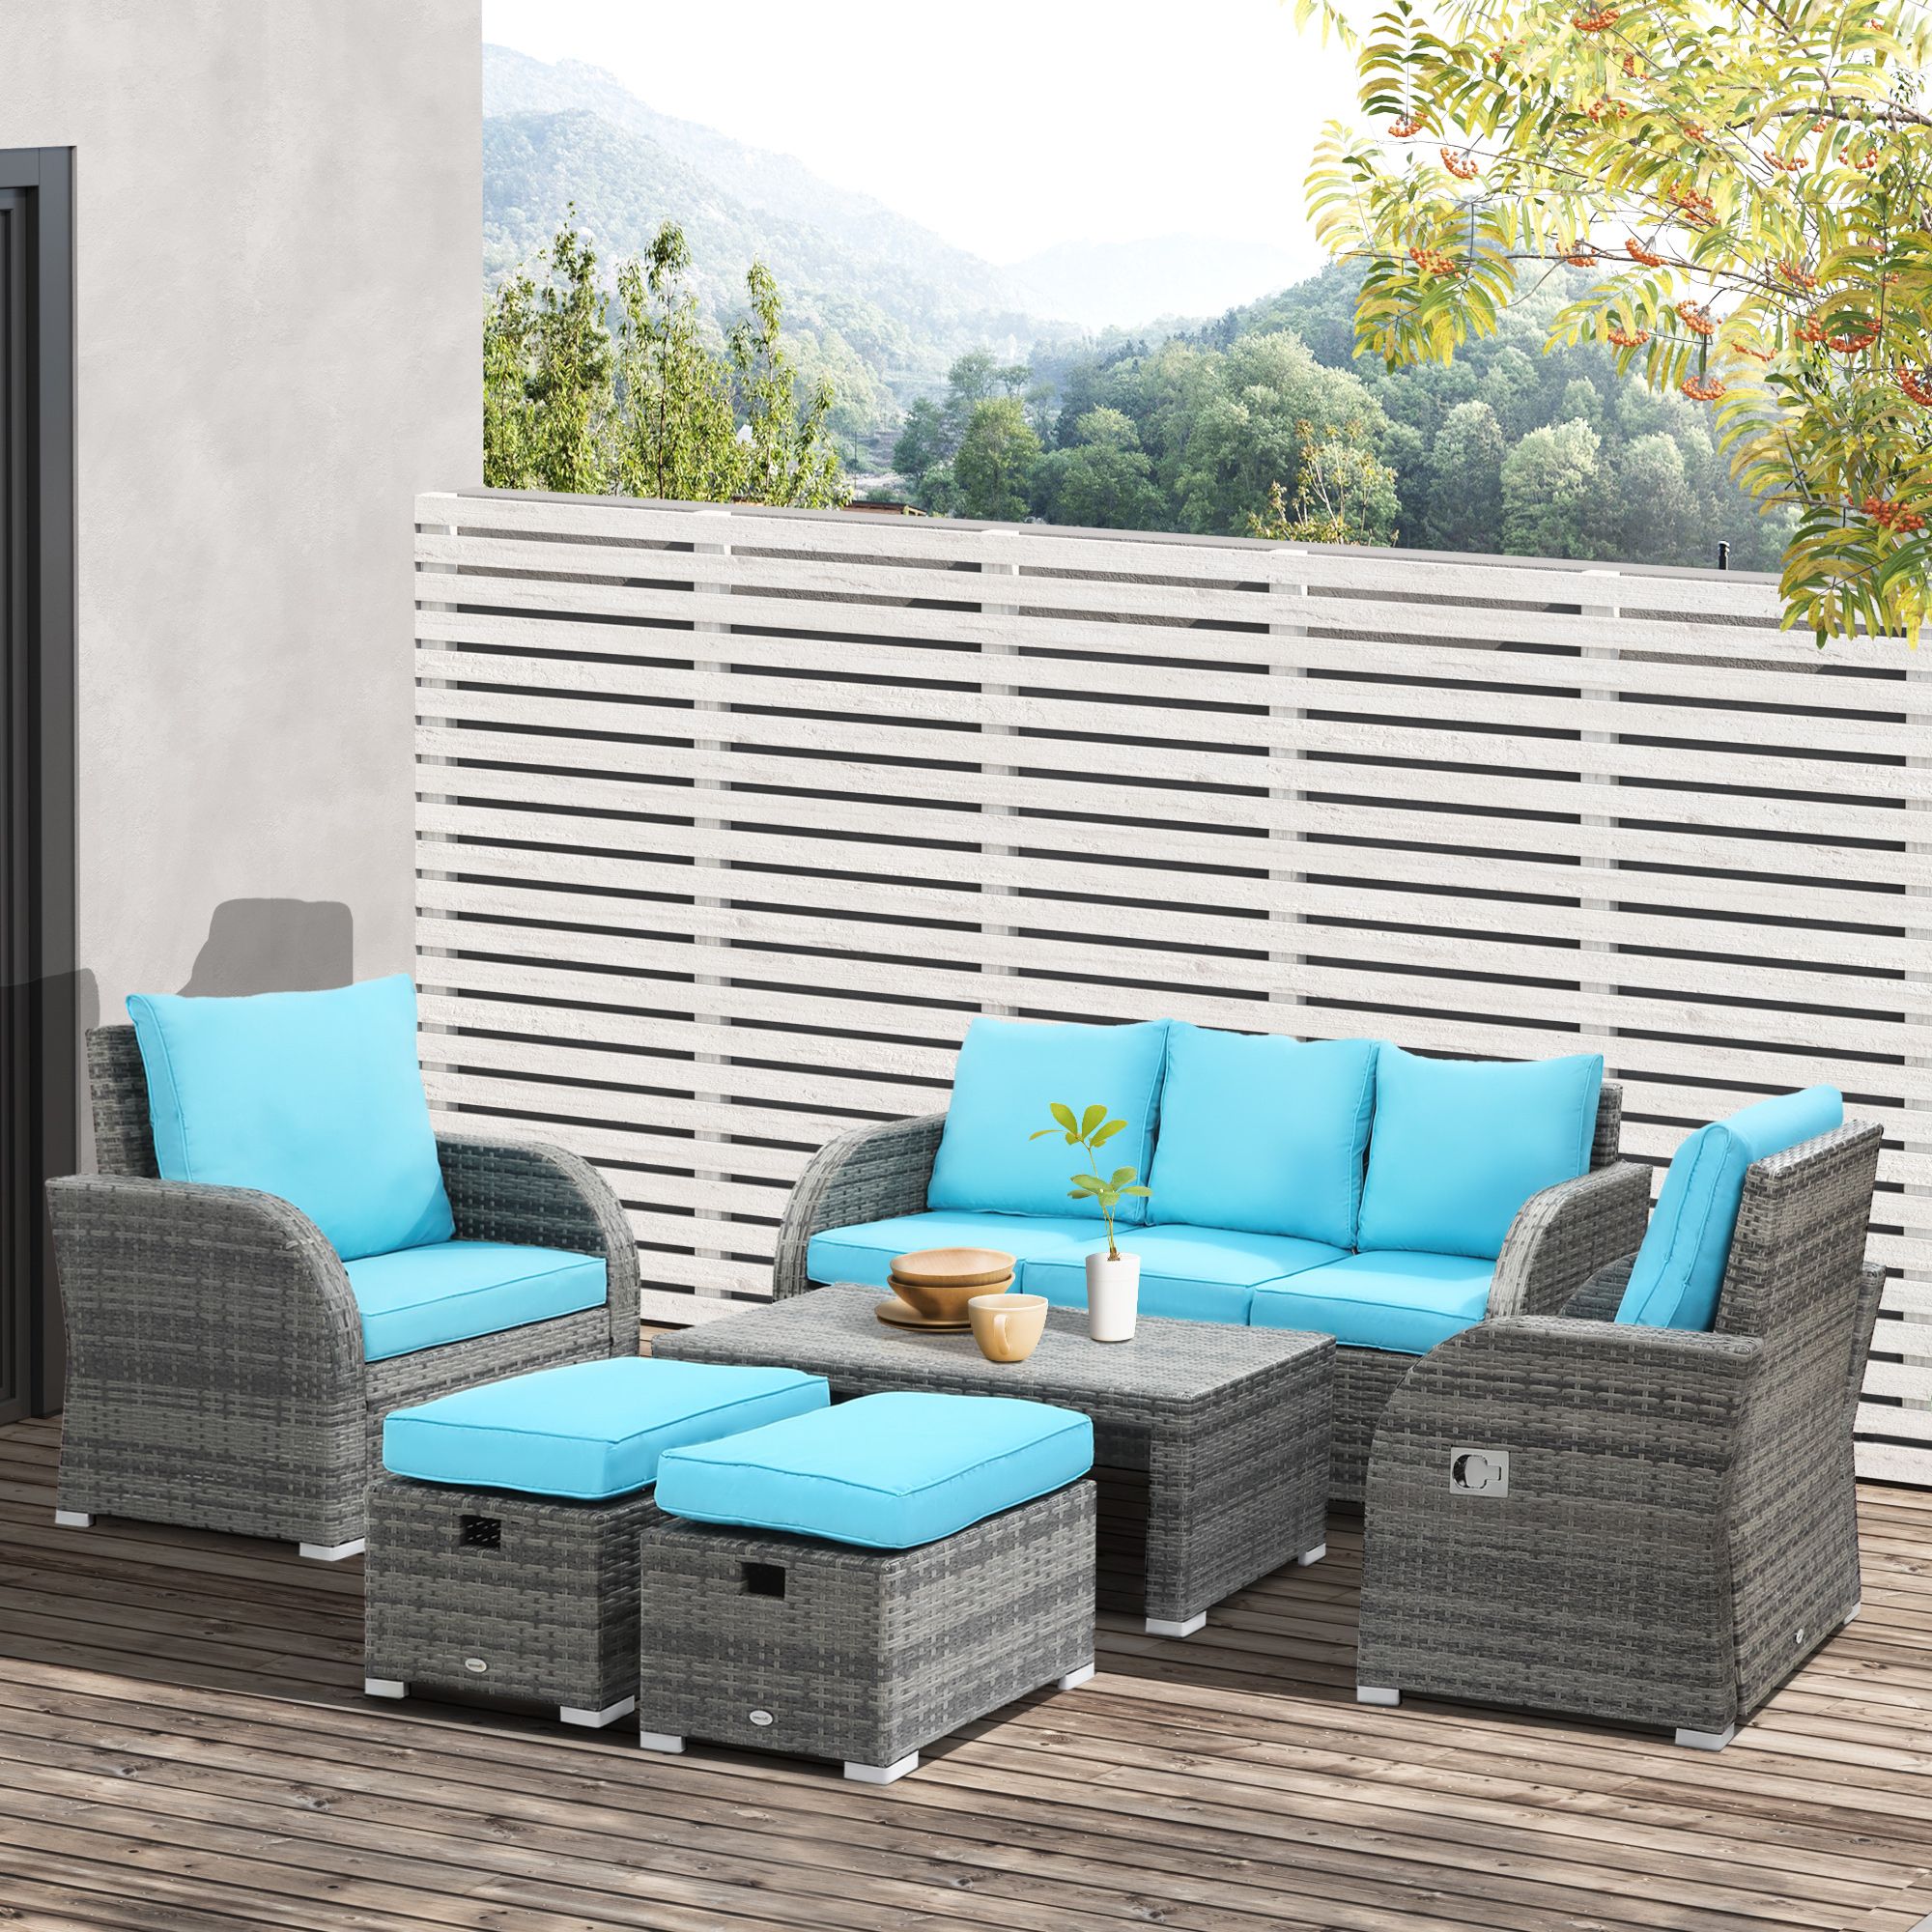 Furniture Conversation Set Cushioned Sofa Tables With Regard To Newest Outsunny 6 Pieces Patio Wicker Sofa Sets, Outdoor Sectional Furniture Set,  Include 3 Seat Sofa, 2 Adjustable Recliners, 2 Footstools & Table Set For  Lawn Garden Backyard, Sky Blue 6 Piece Rattan Cushioned Recliner, (Photo 10 of 15)